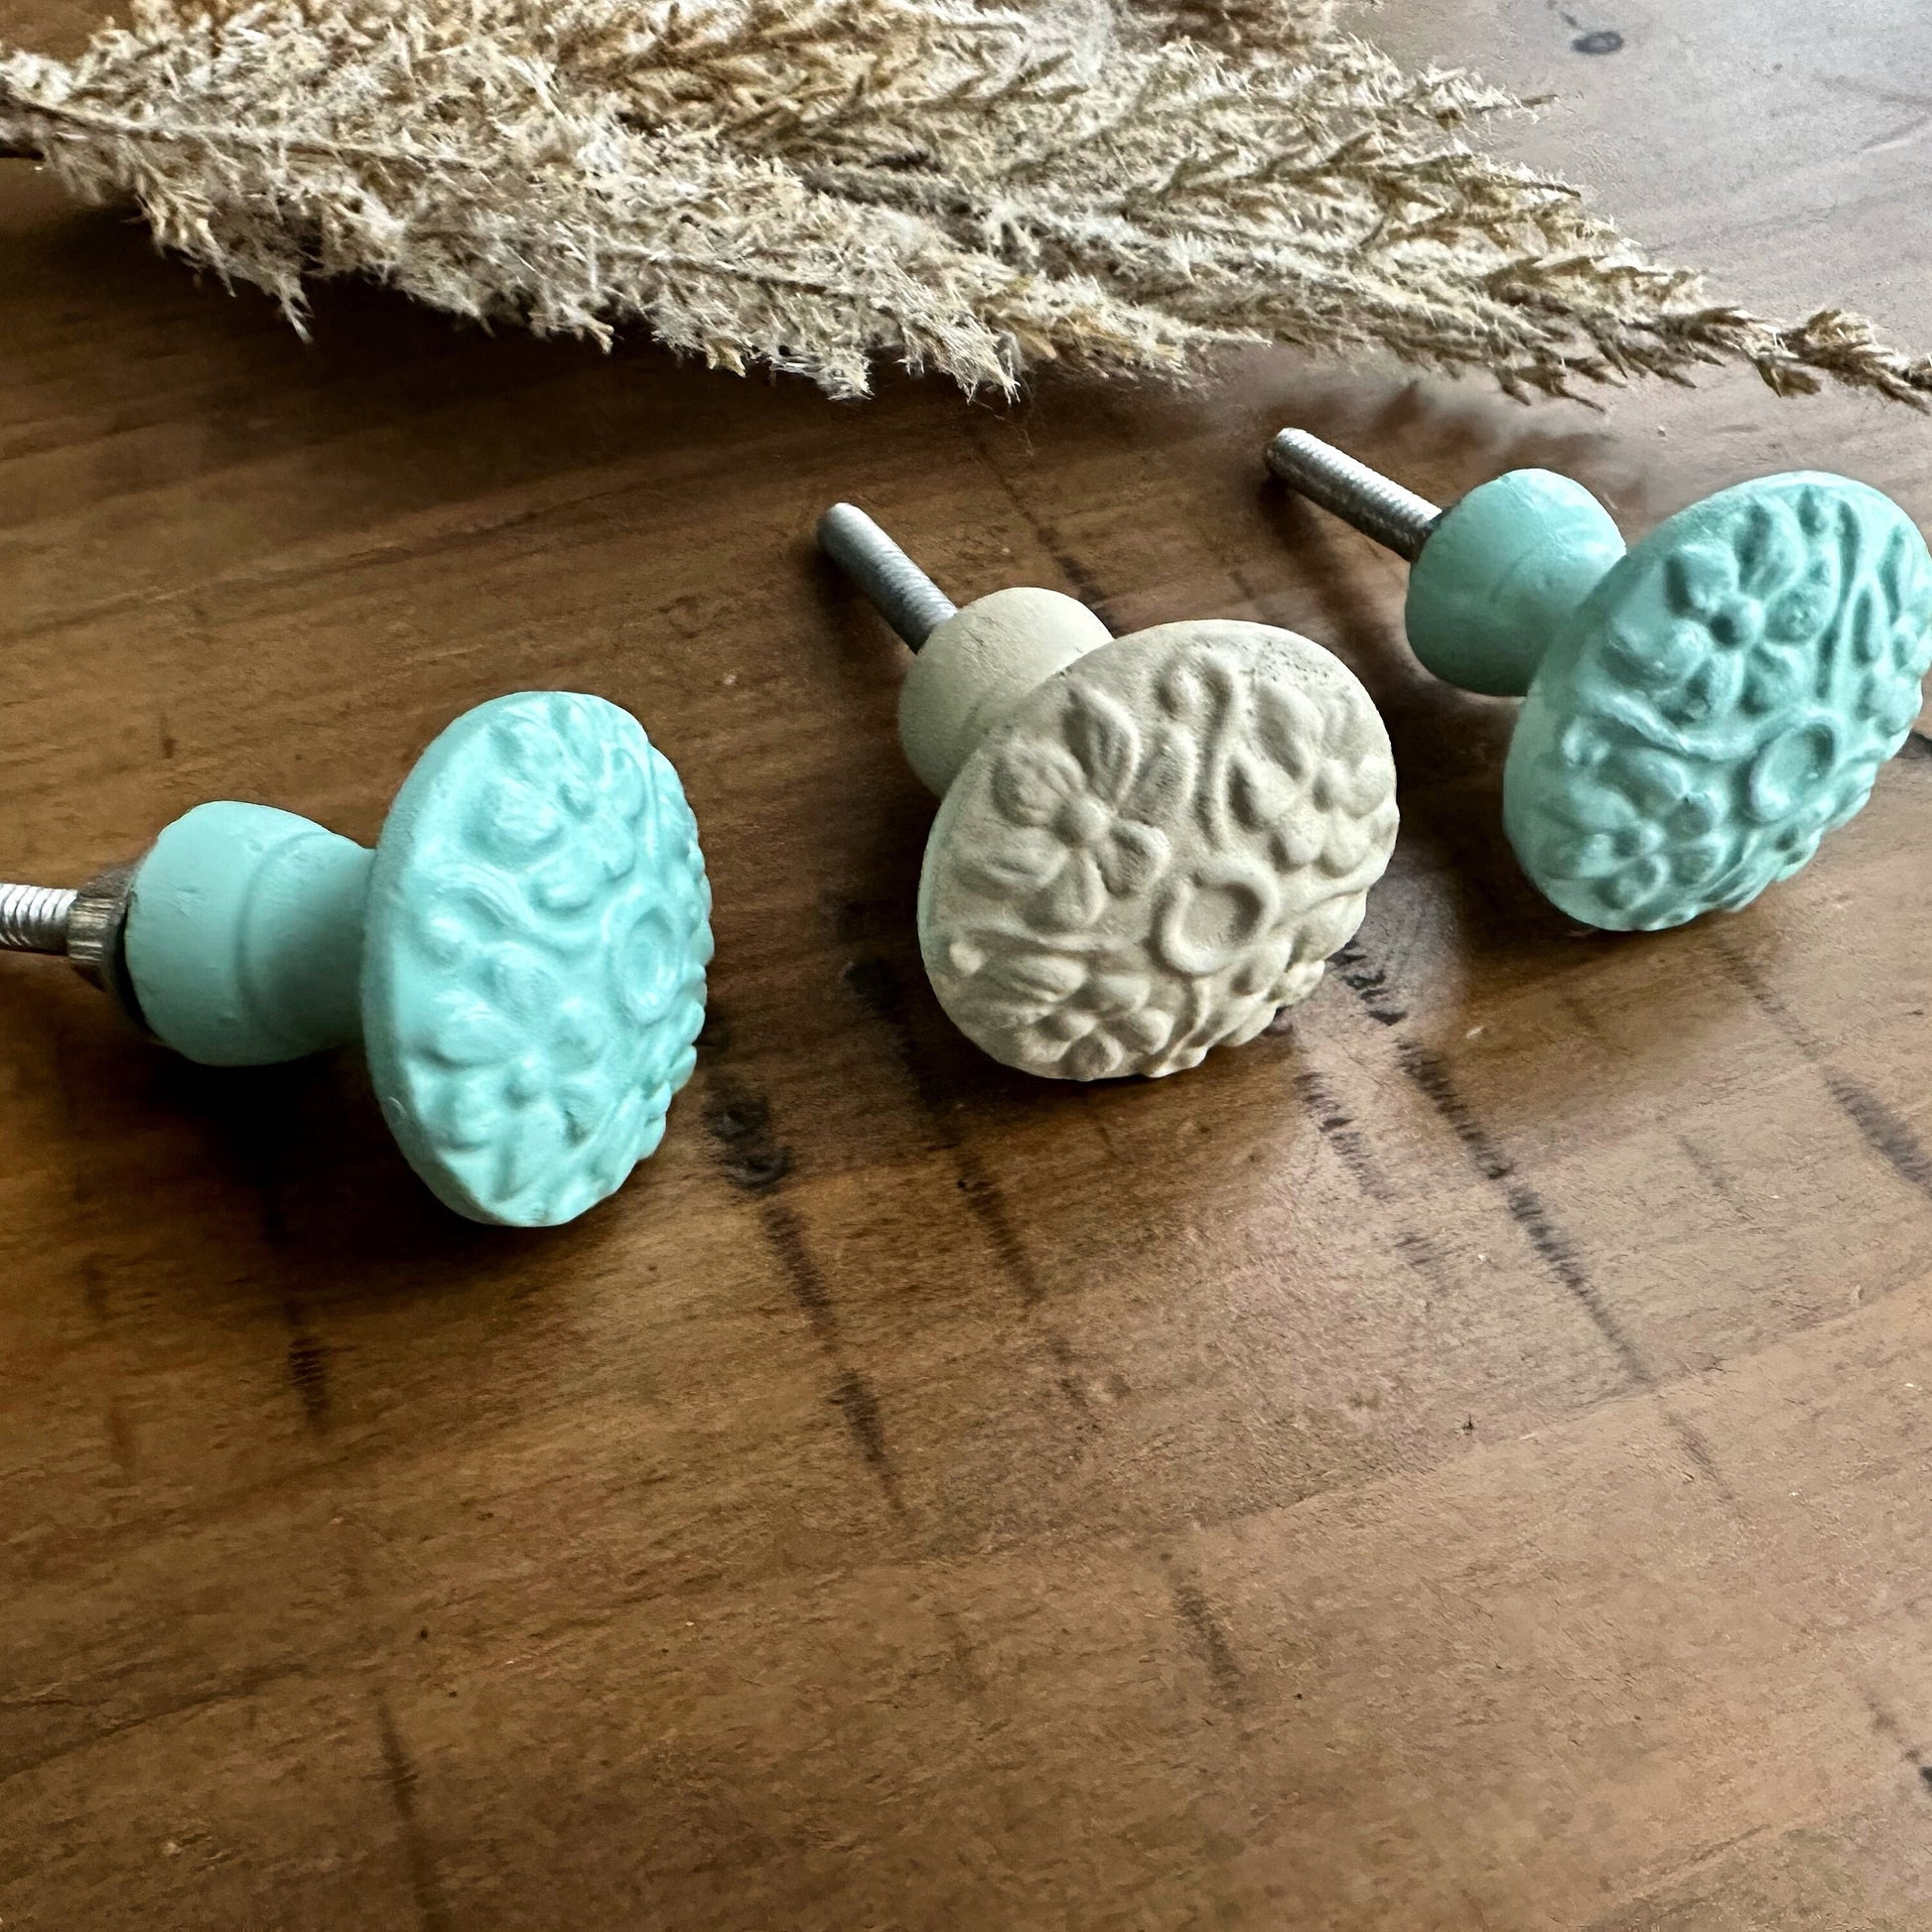 FLORAL Knobs / Drawer or Desk Knobs / Dresser Drawer Pulls / Distressed White Knobs / Shabby Chic Style / Cabinet Handles